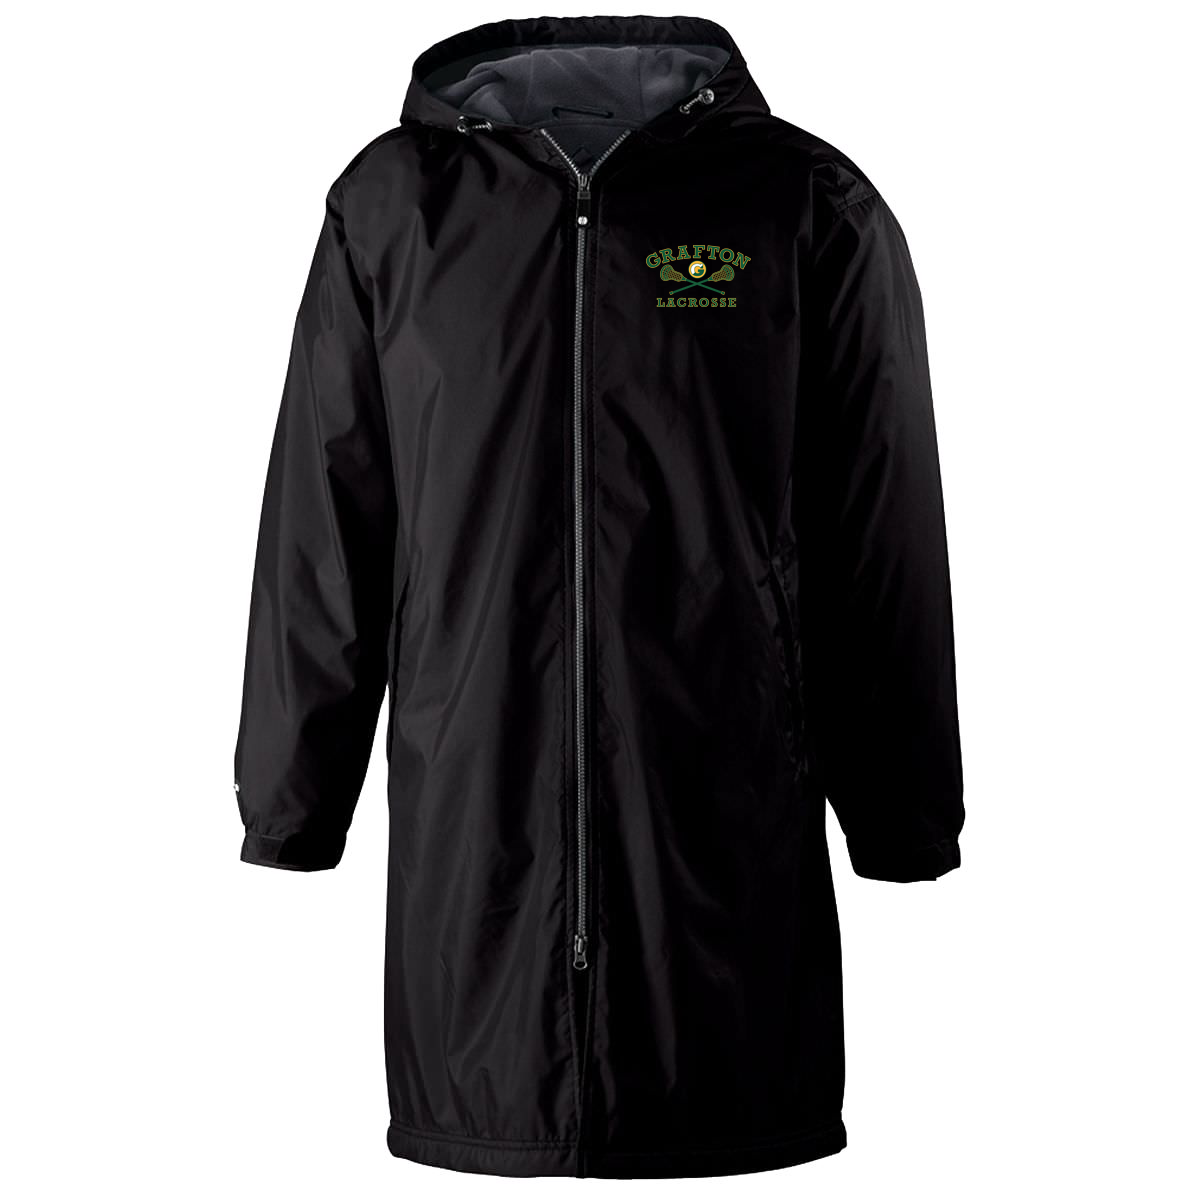 Grafton Lacrosse Holloway Conquest Jacket